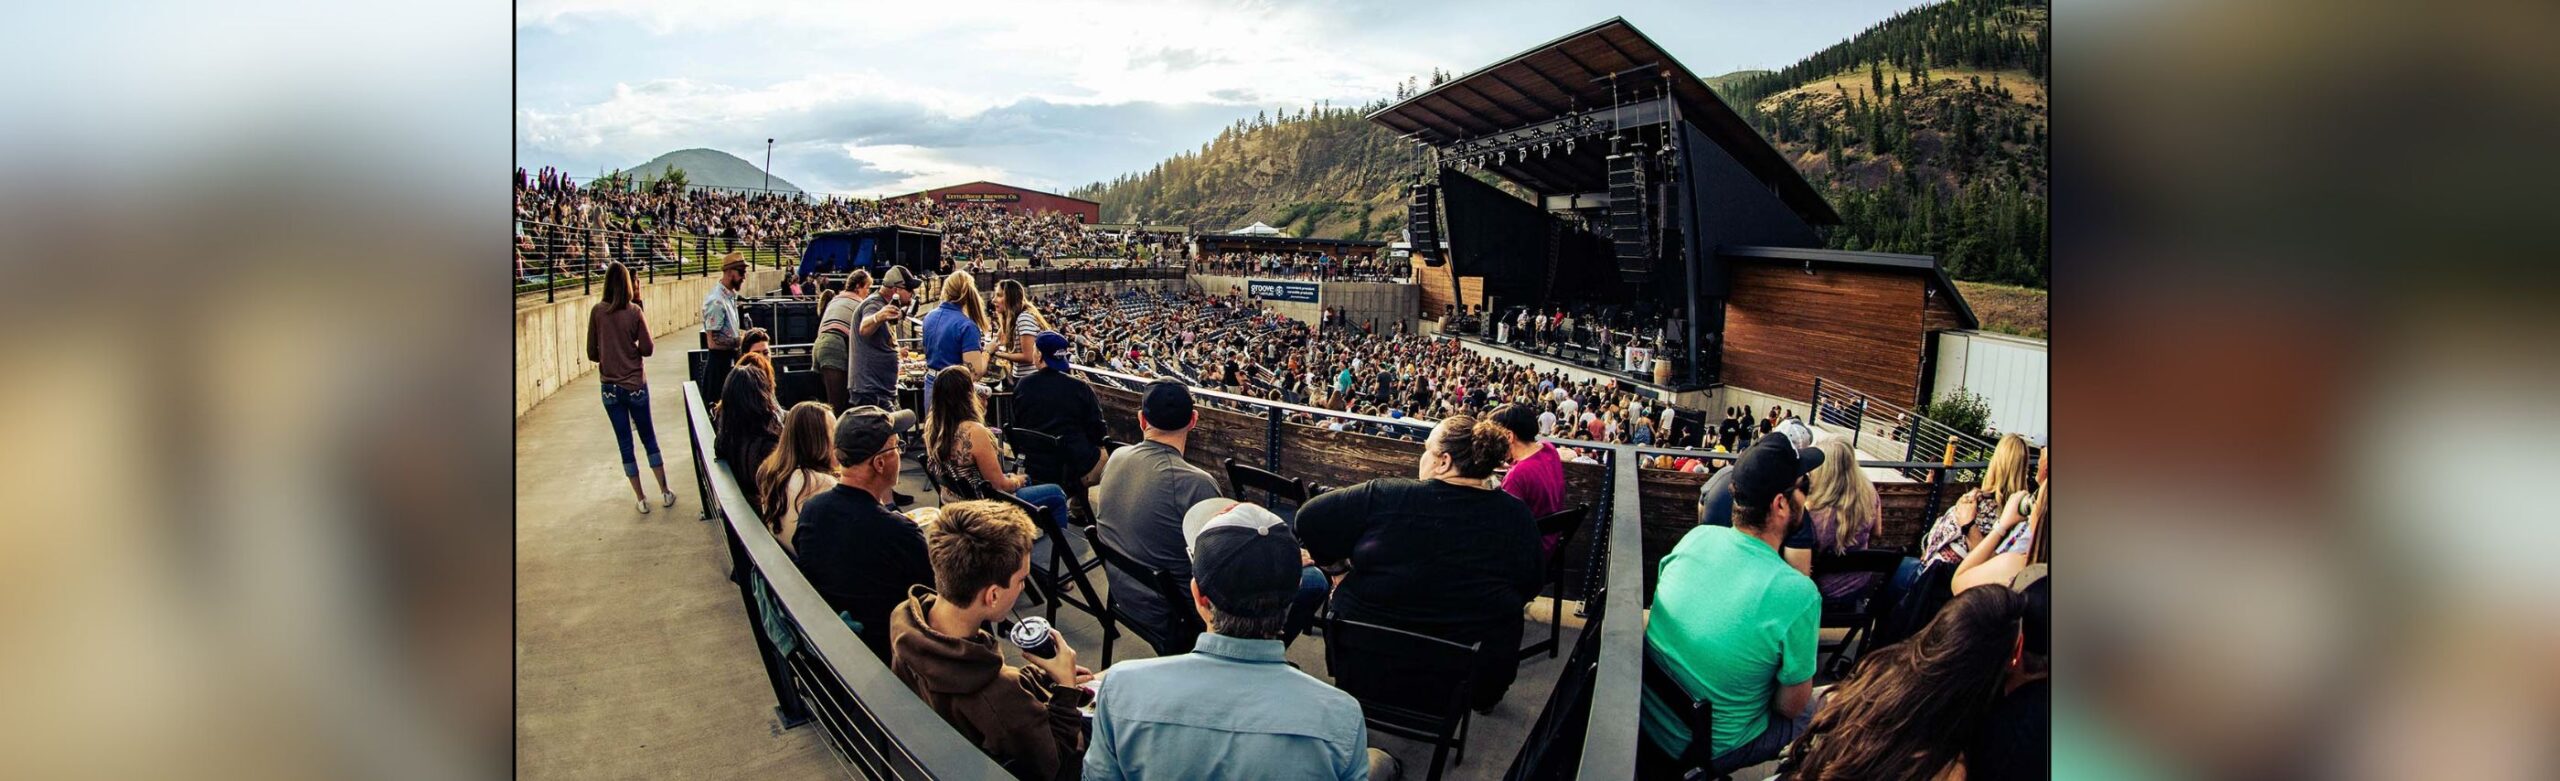 Now Available: Premium Box Seats for Lindsey Stirling at KettleHouse Amphitheater Image